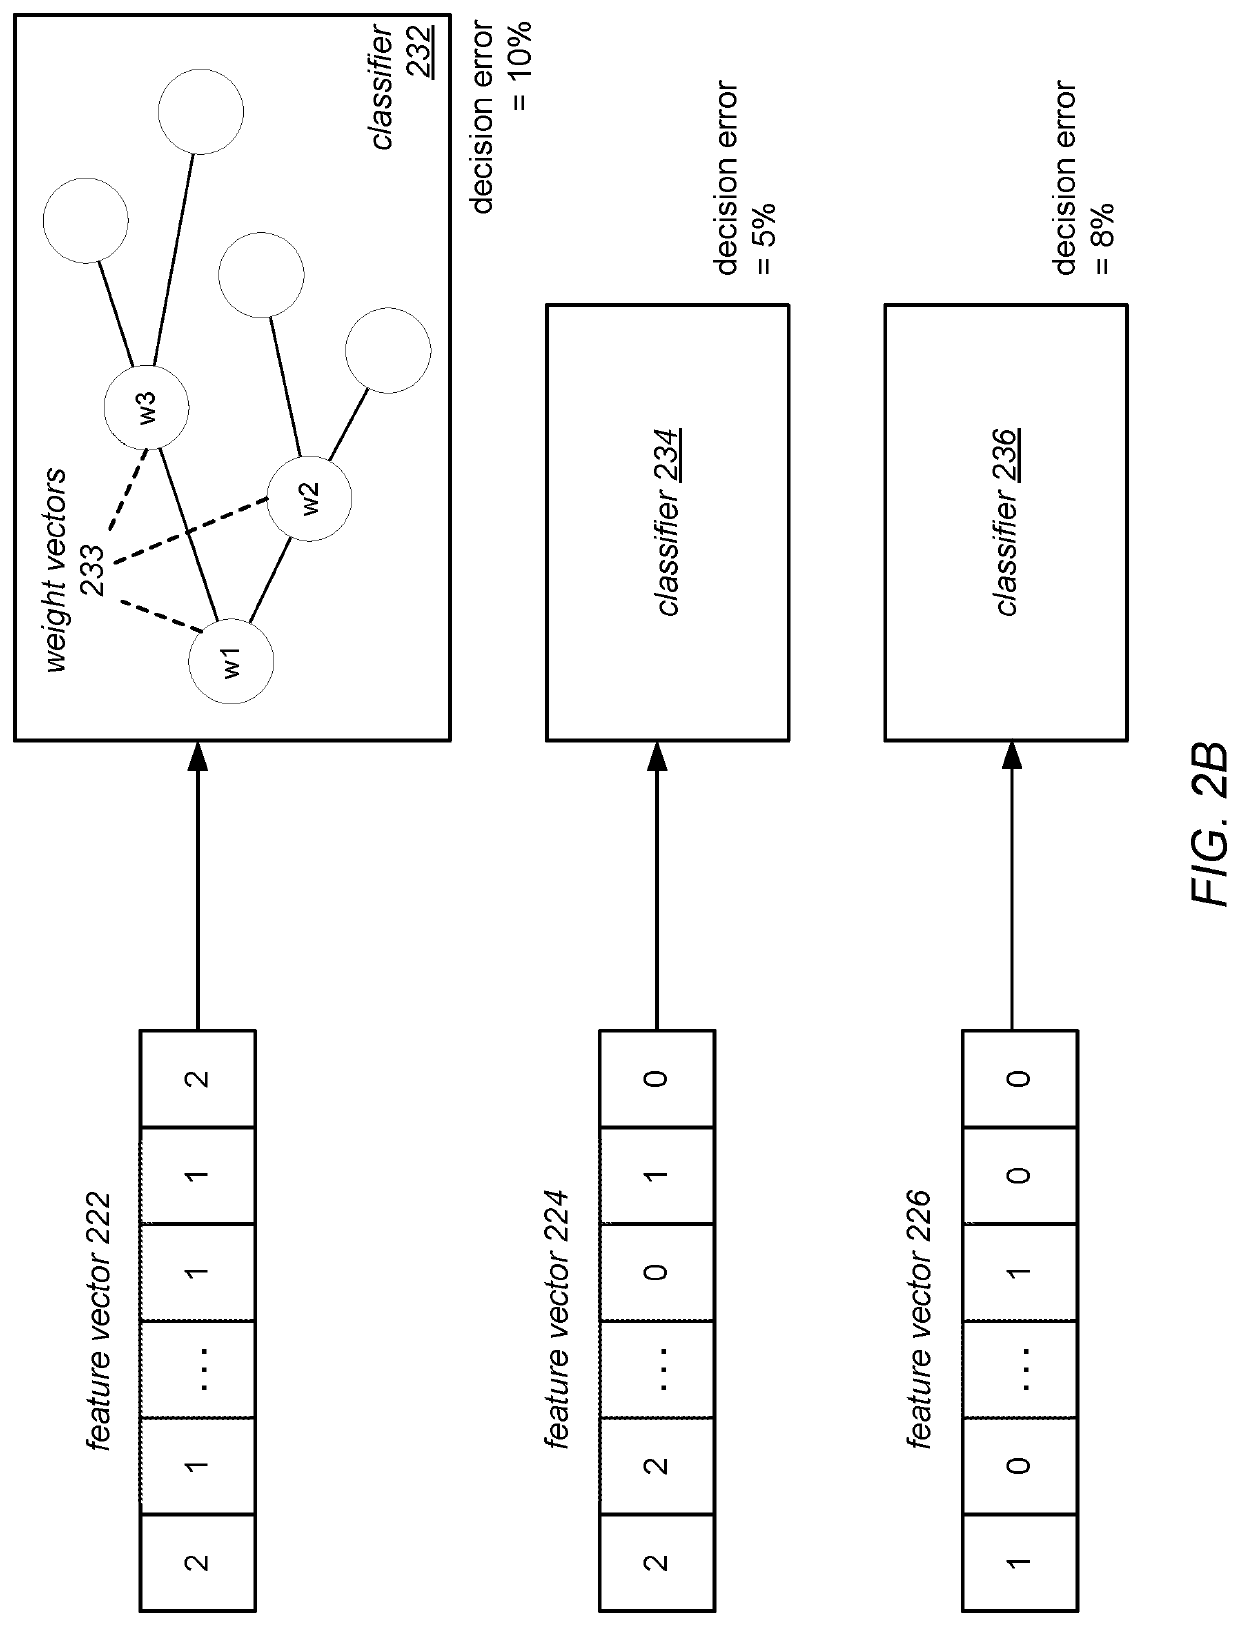 Ensembled decision systems using feature hashing models